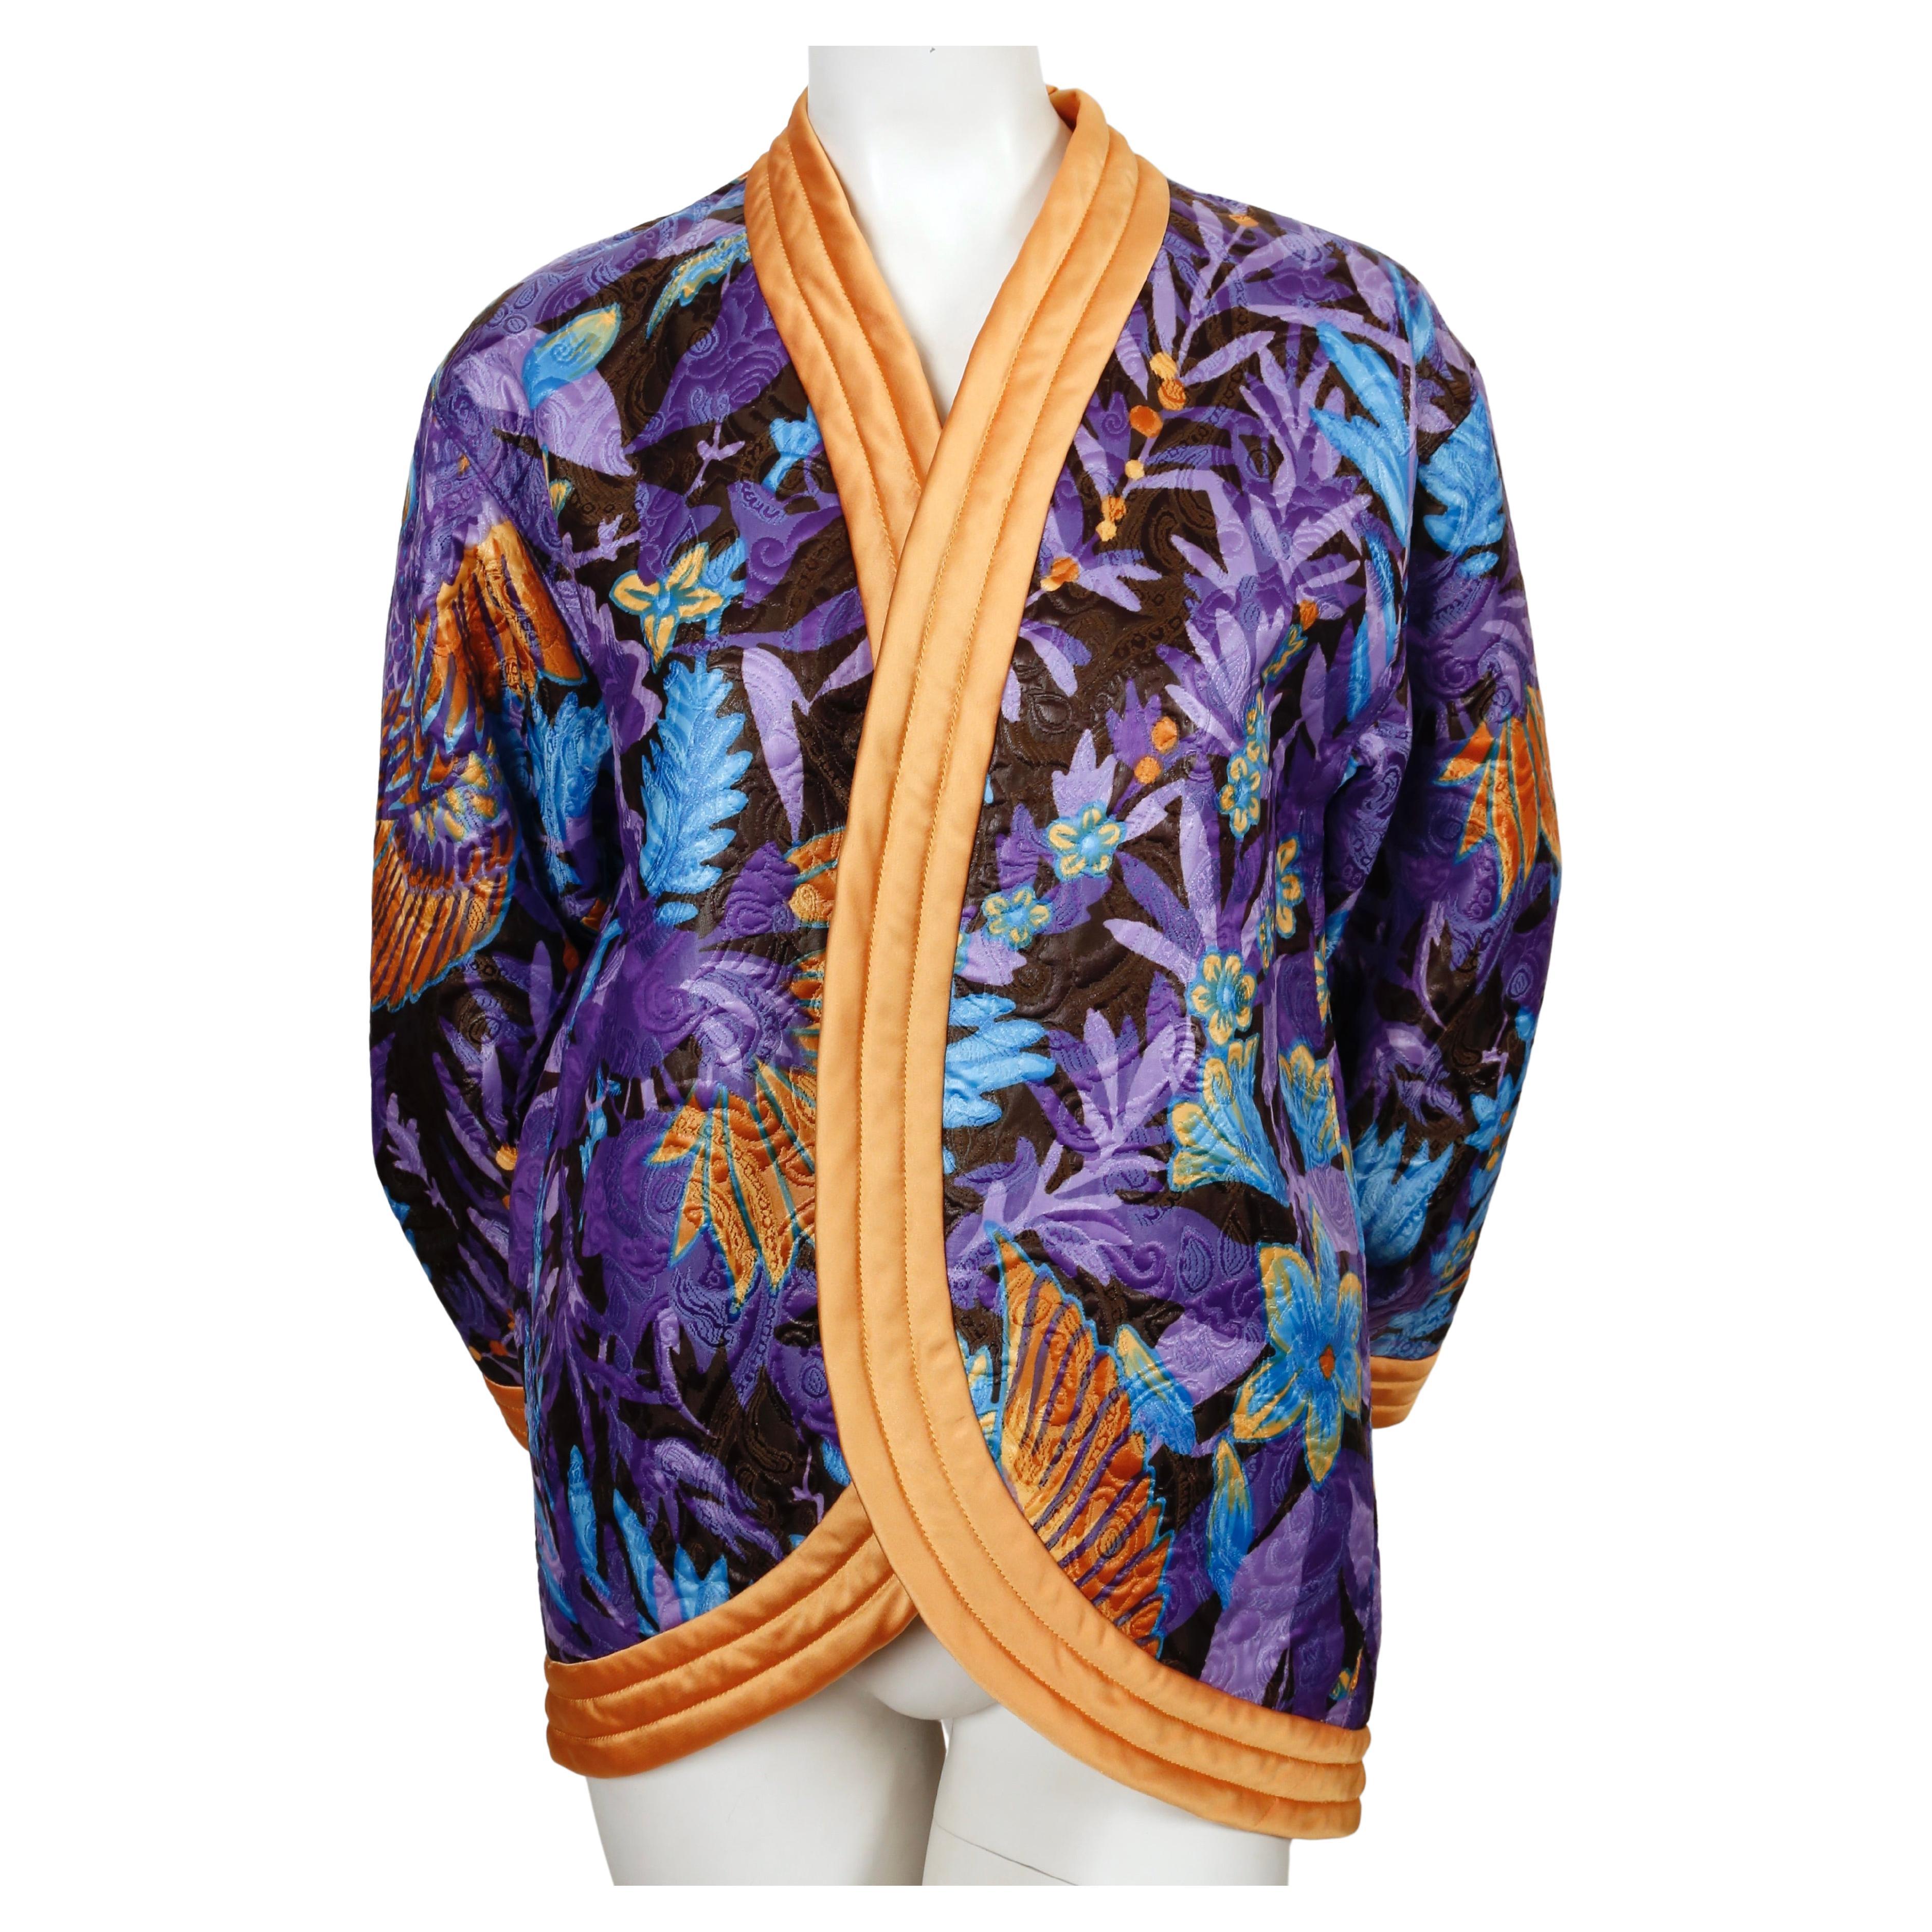 Satin kimono jacket with matelasse Asian phoenix motif designed by Yves Saint Laurent dating to 1979 exactly as seen on the runway. Labeled a French 40 however this can fit a variety of sizes due to the loose cut. Jacket was not clipped on size 2